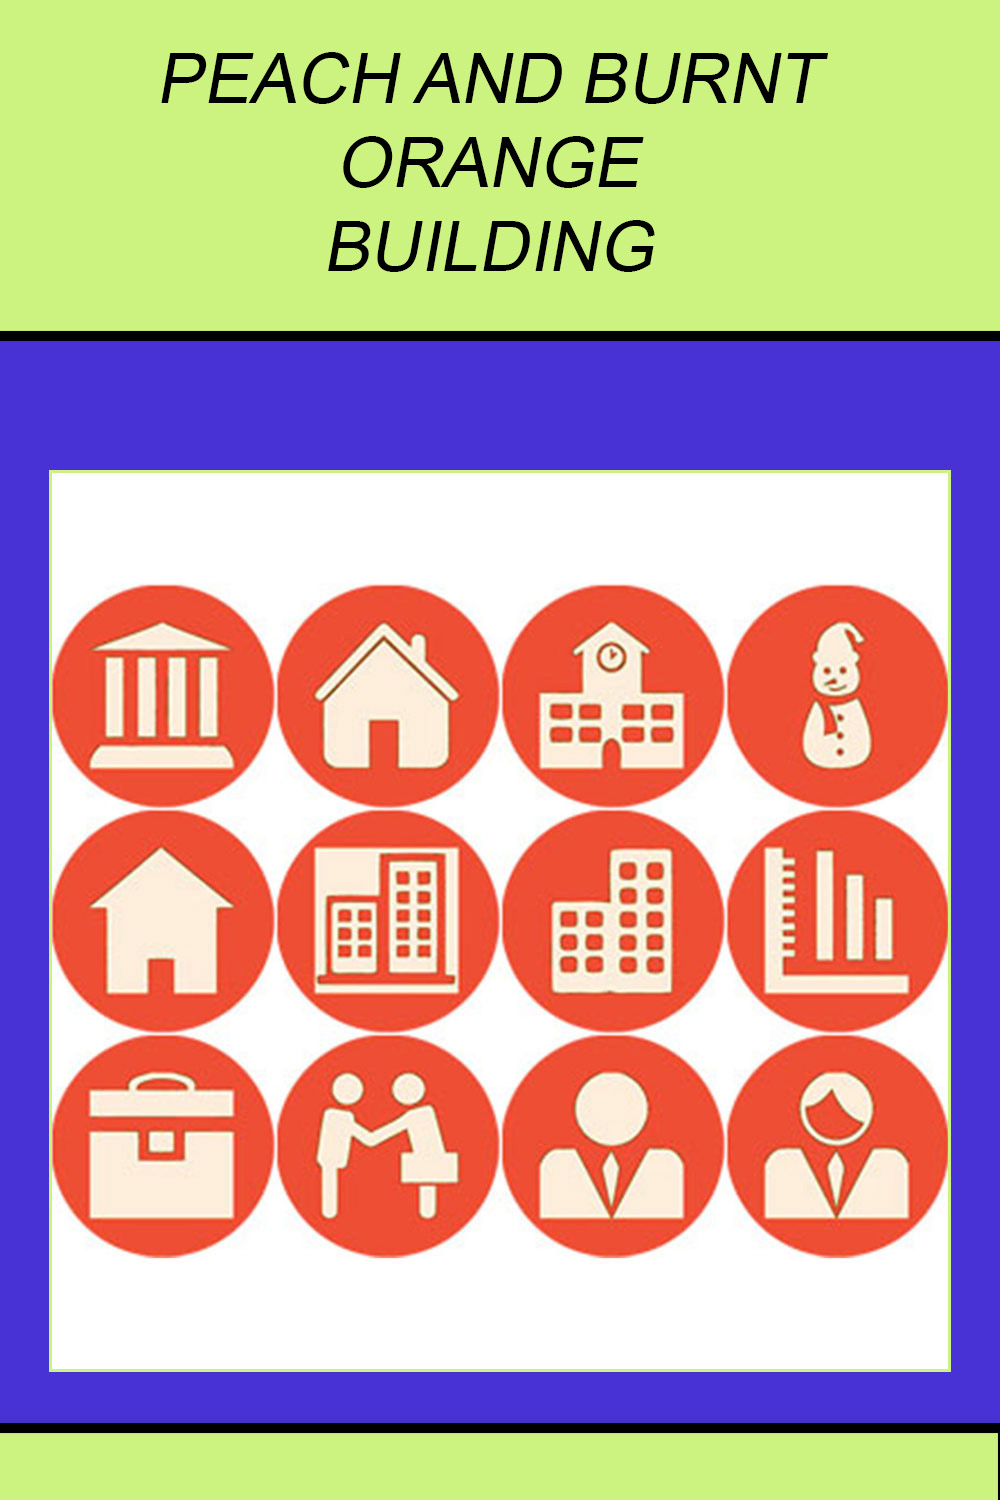 PEACH AND BURNT ORANGE BUILDING ROUND ICONS pinterest preview image.